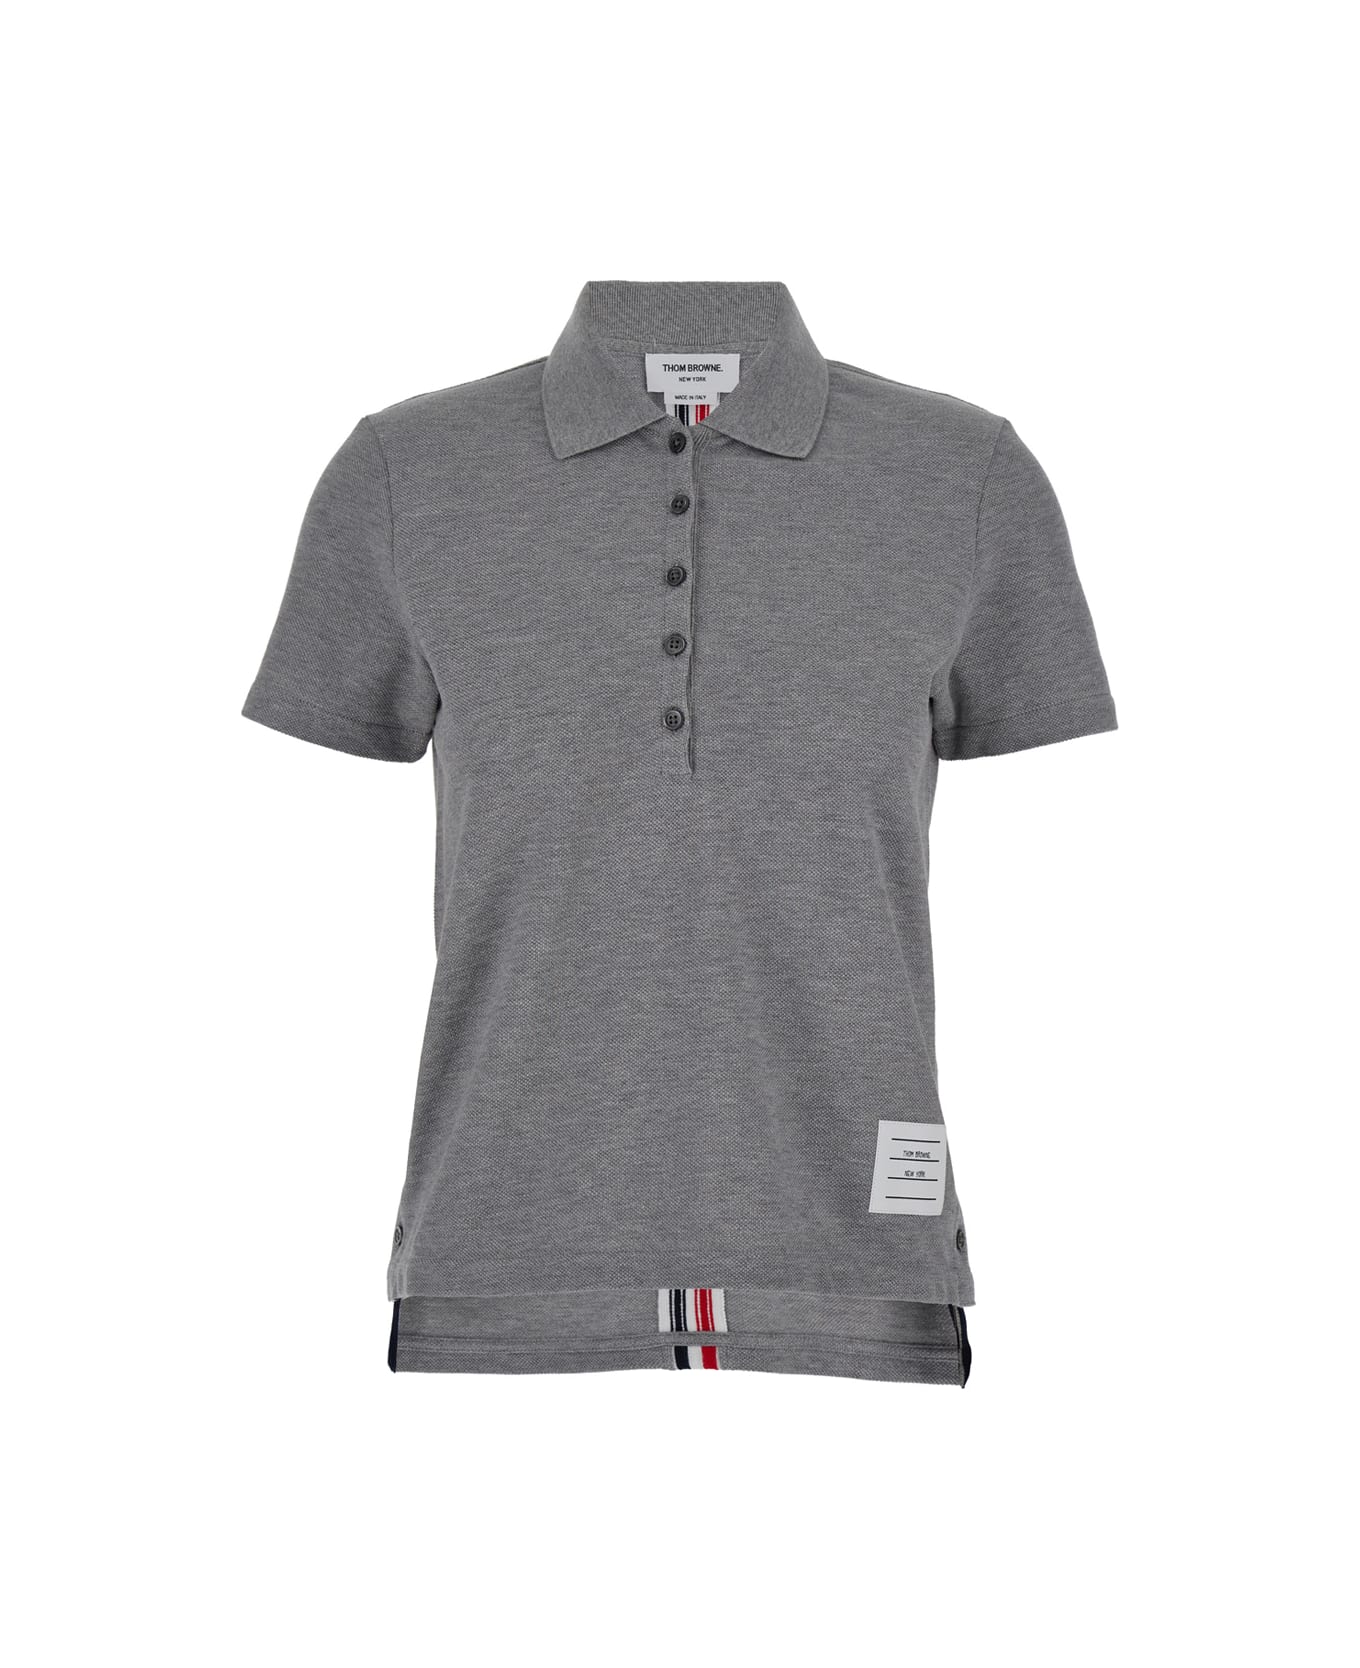 Thom Browne Relaxed Fit Short Sleeve Polo W/ Center Back Rwb Stripe In Classic Pique - Grey